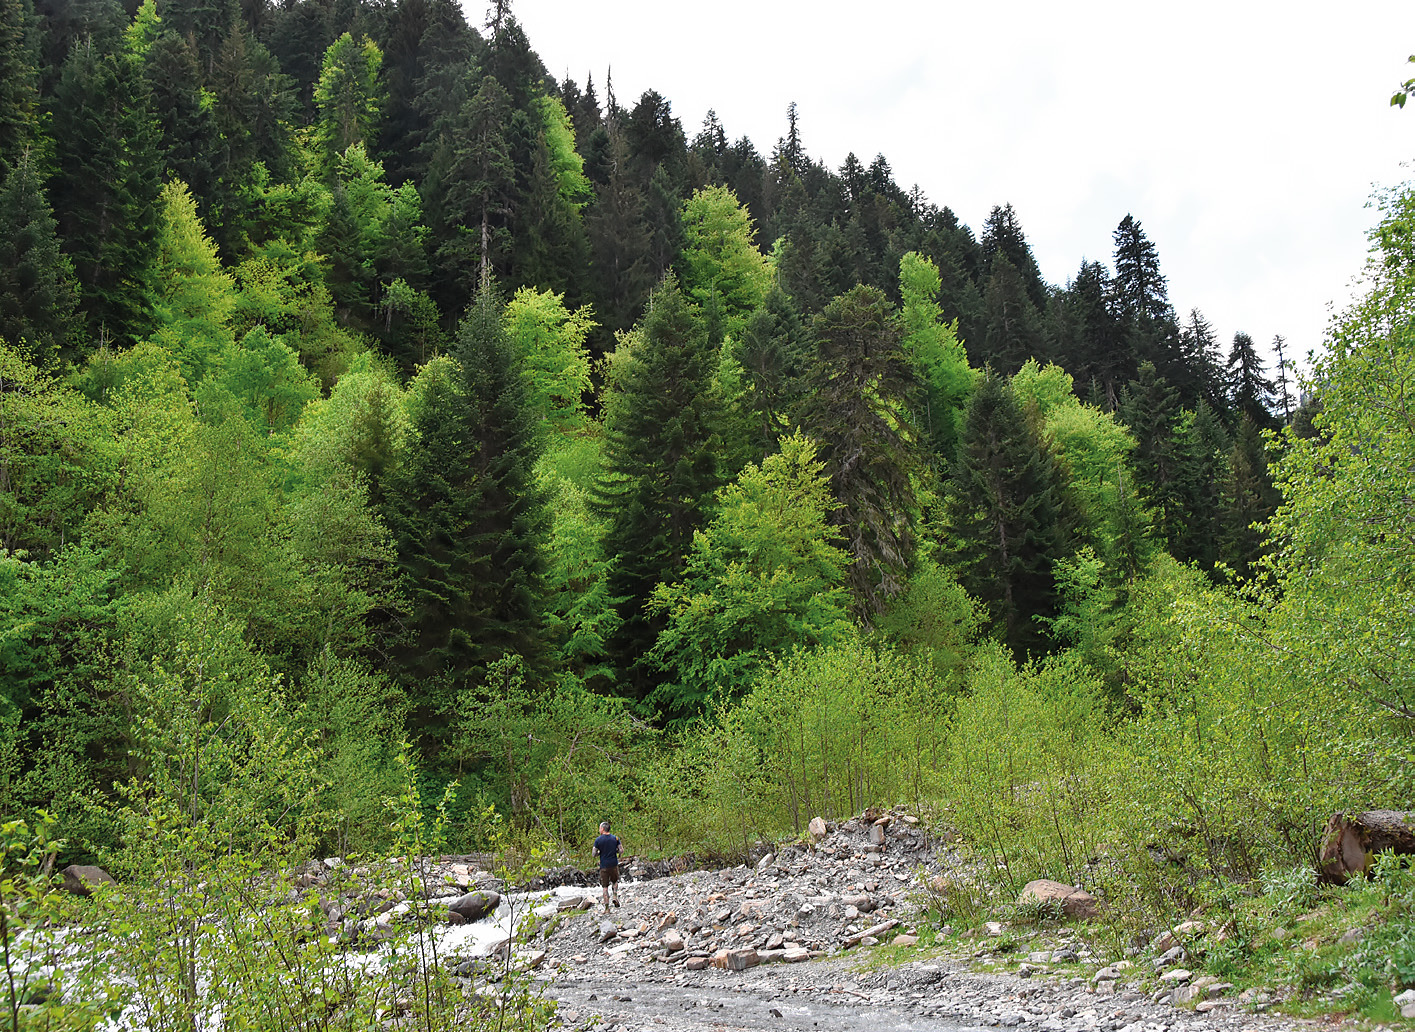 Abies nordmanniana from the Caucasus uses birches and alders for a successful establishment and development.